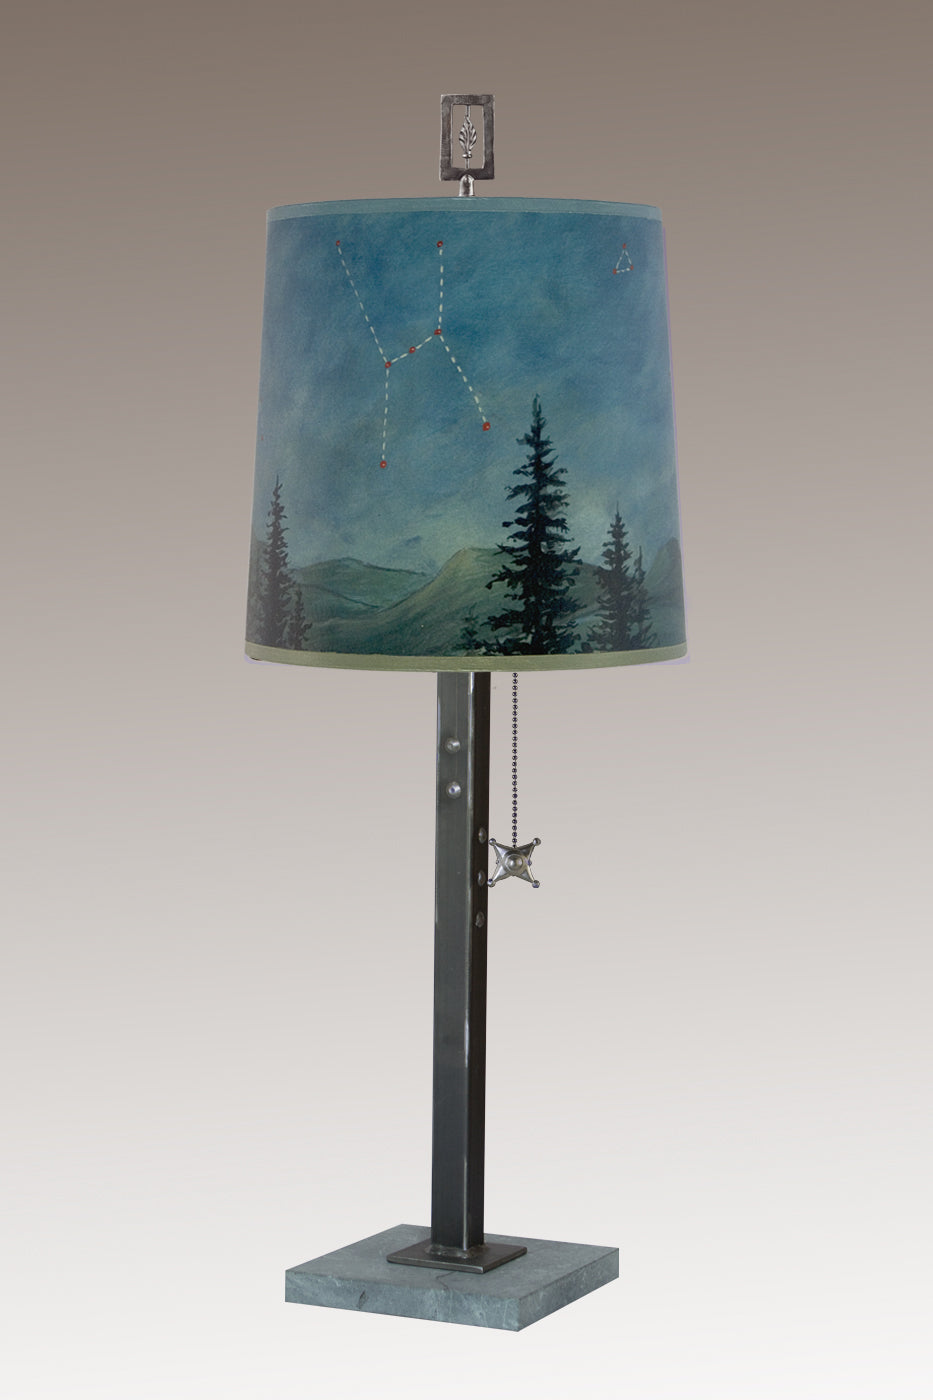 Steel Table Lamp with Medium Drum Shade in Midnight Sky